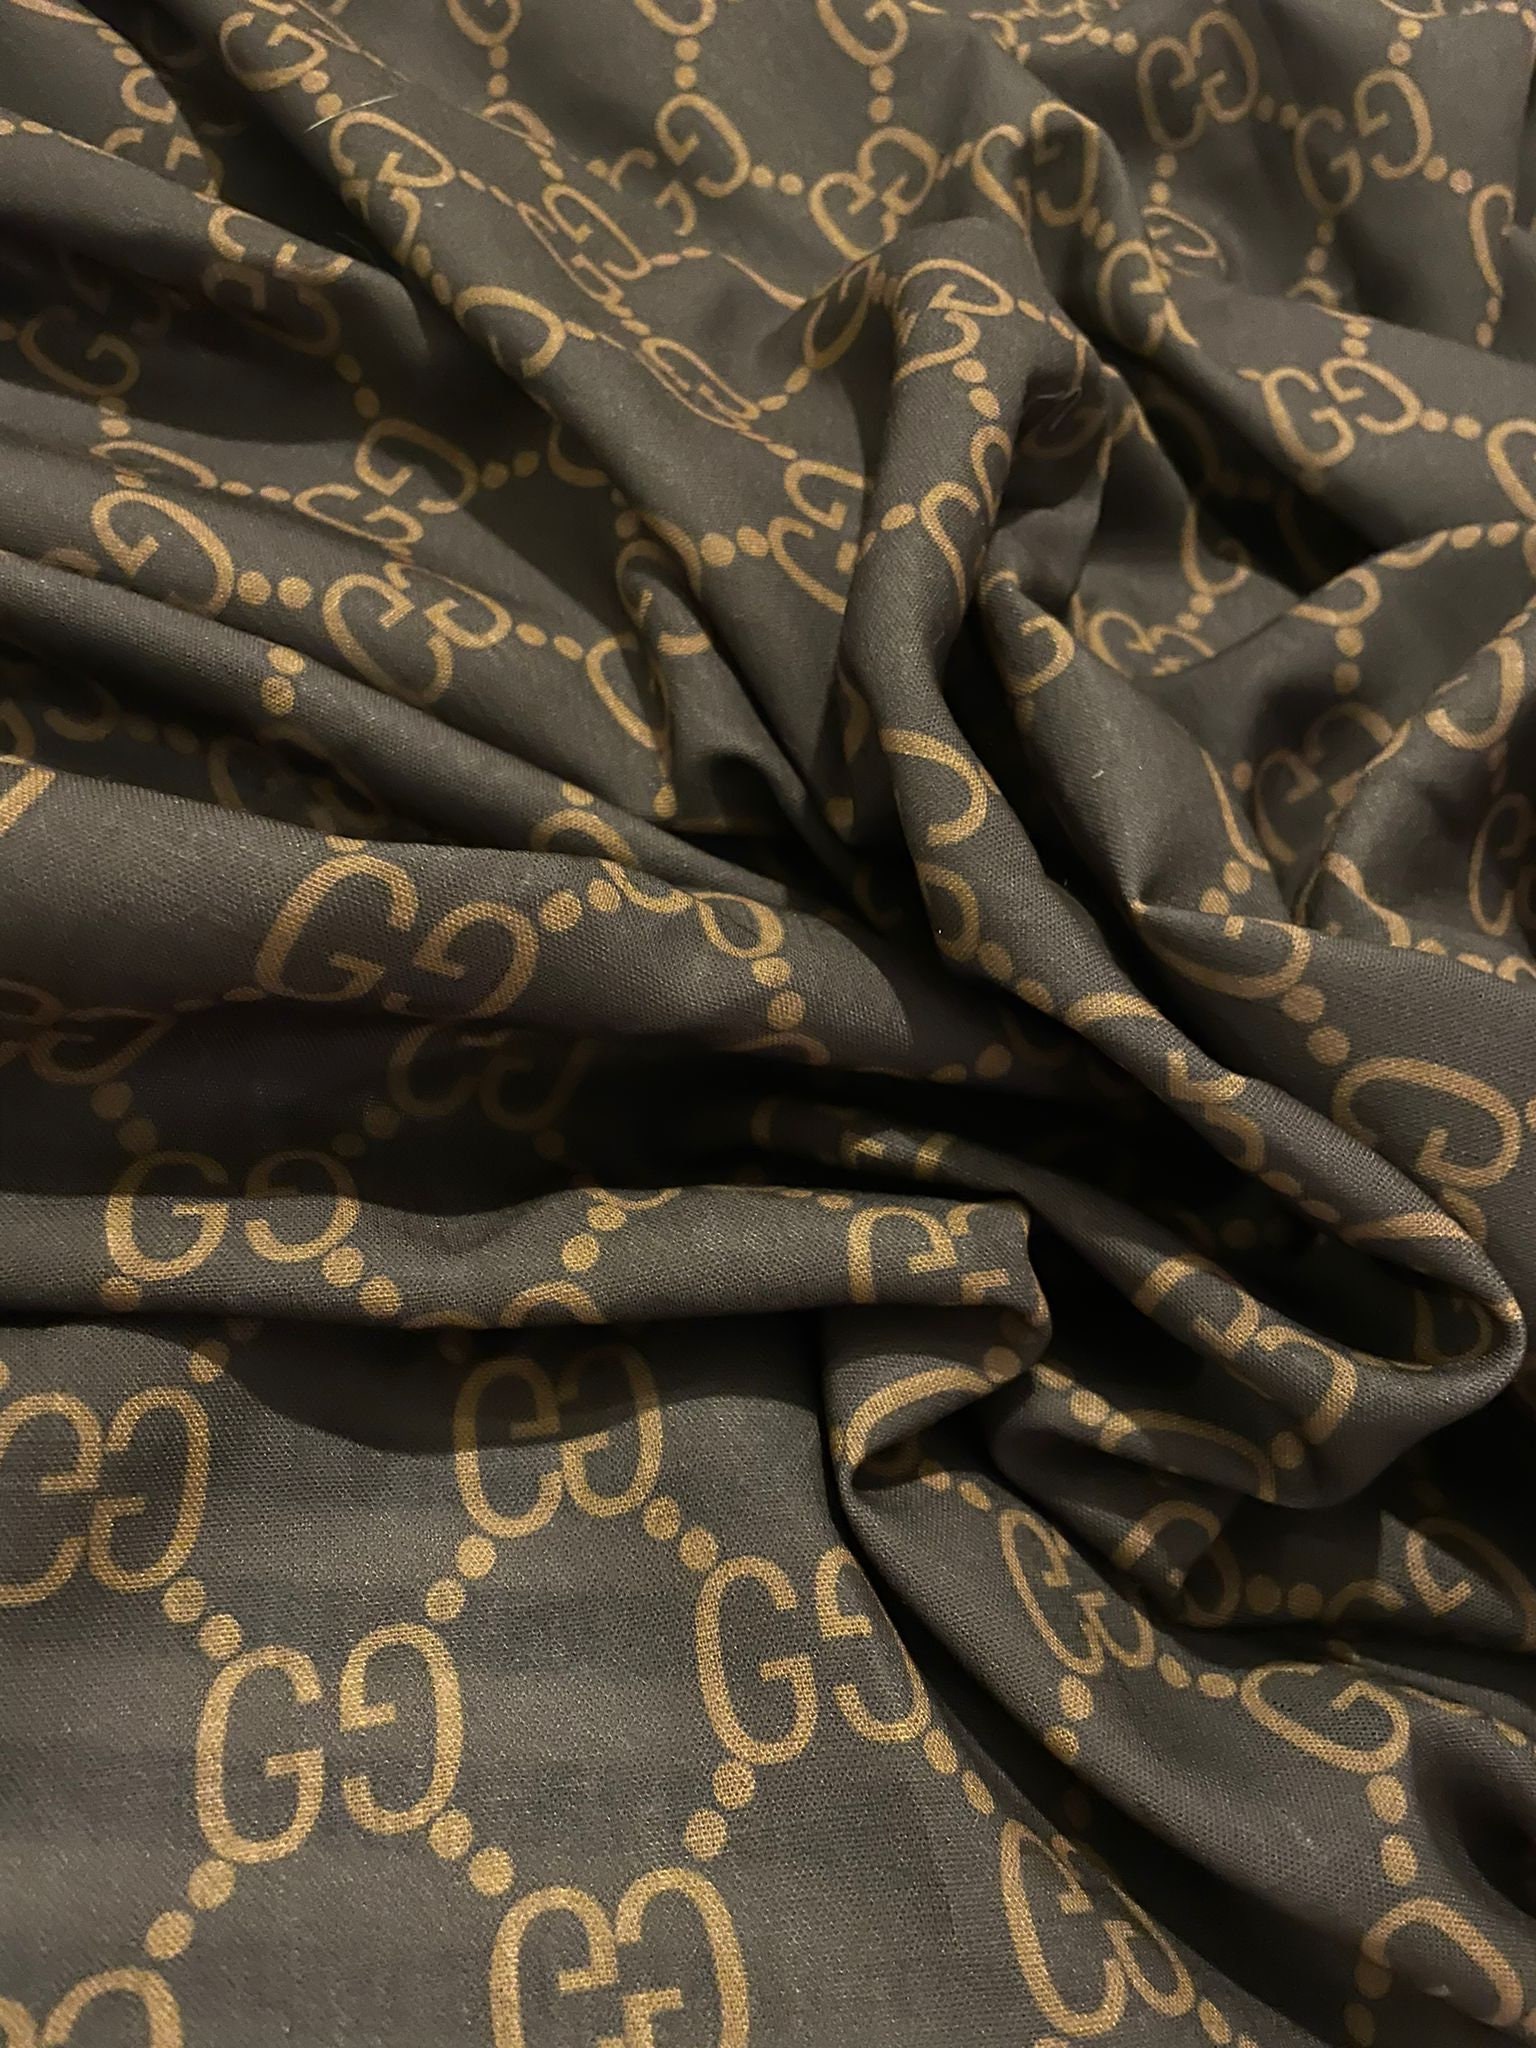 Brown Gucci Leather Fabric By The Yard, Gucci Material For Sale